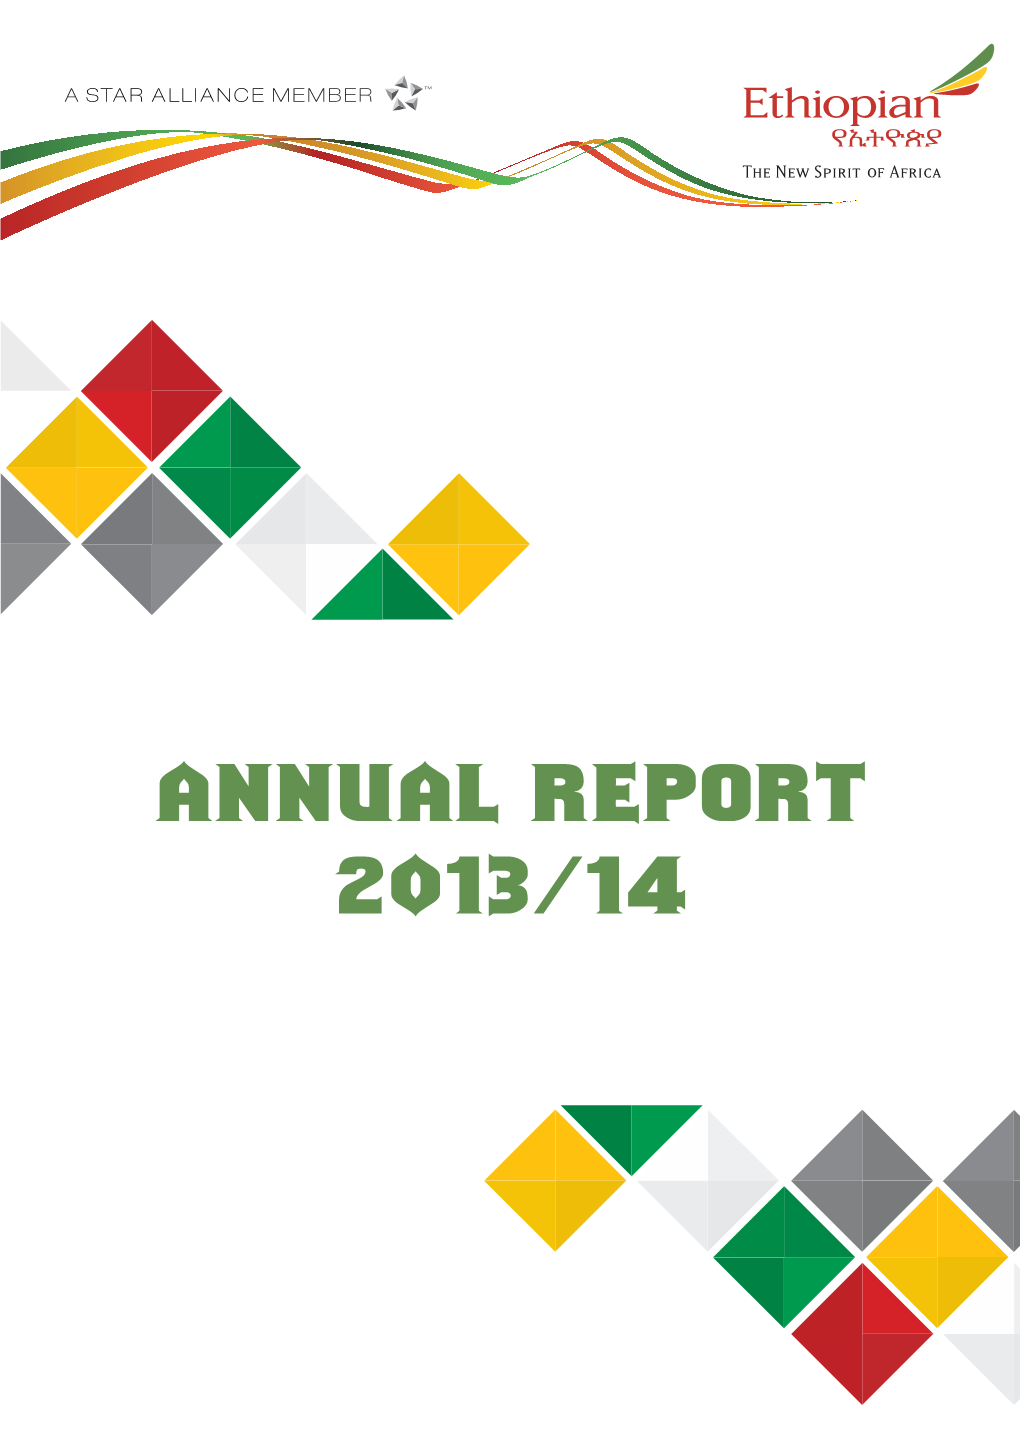 Annual Report 2013/14 Afr Ica’ S Fir S T